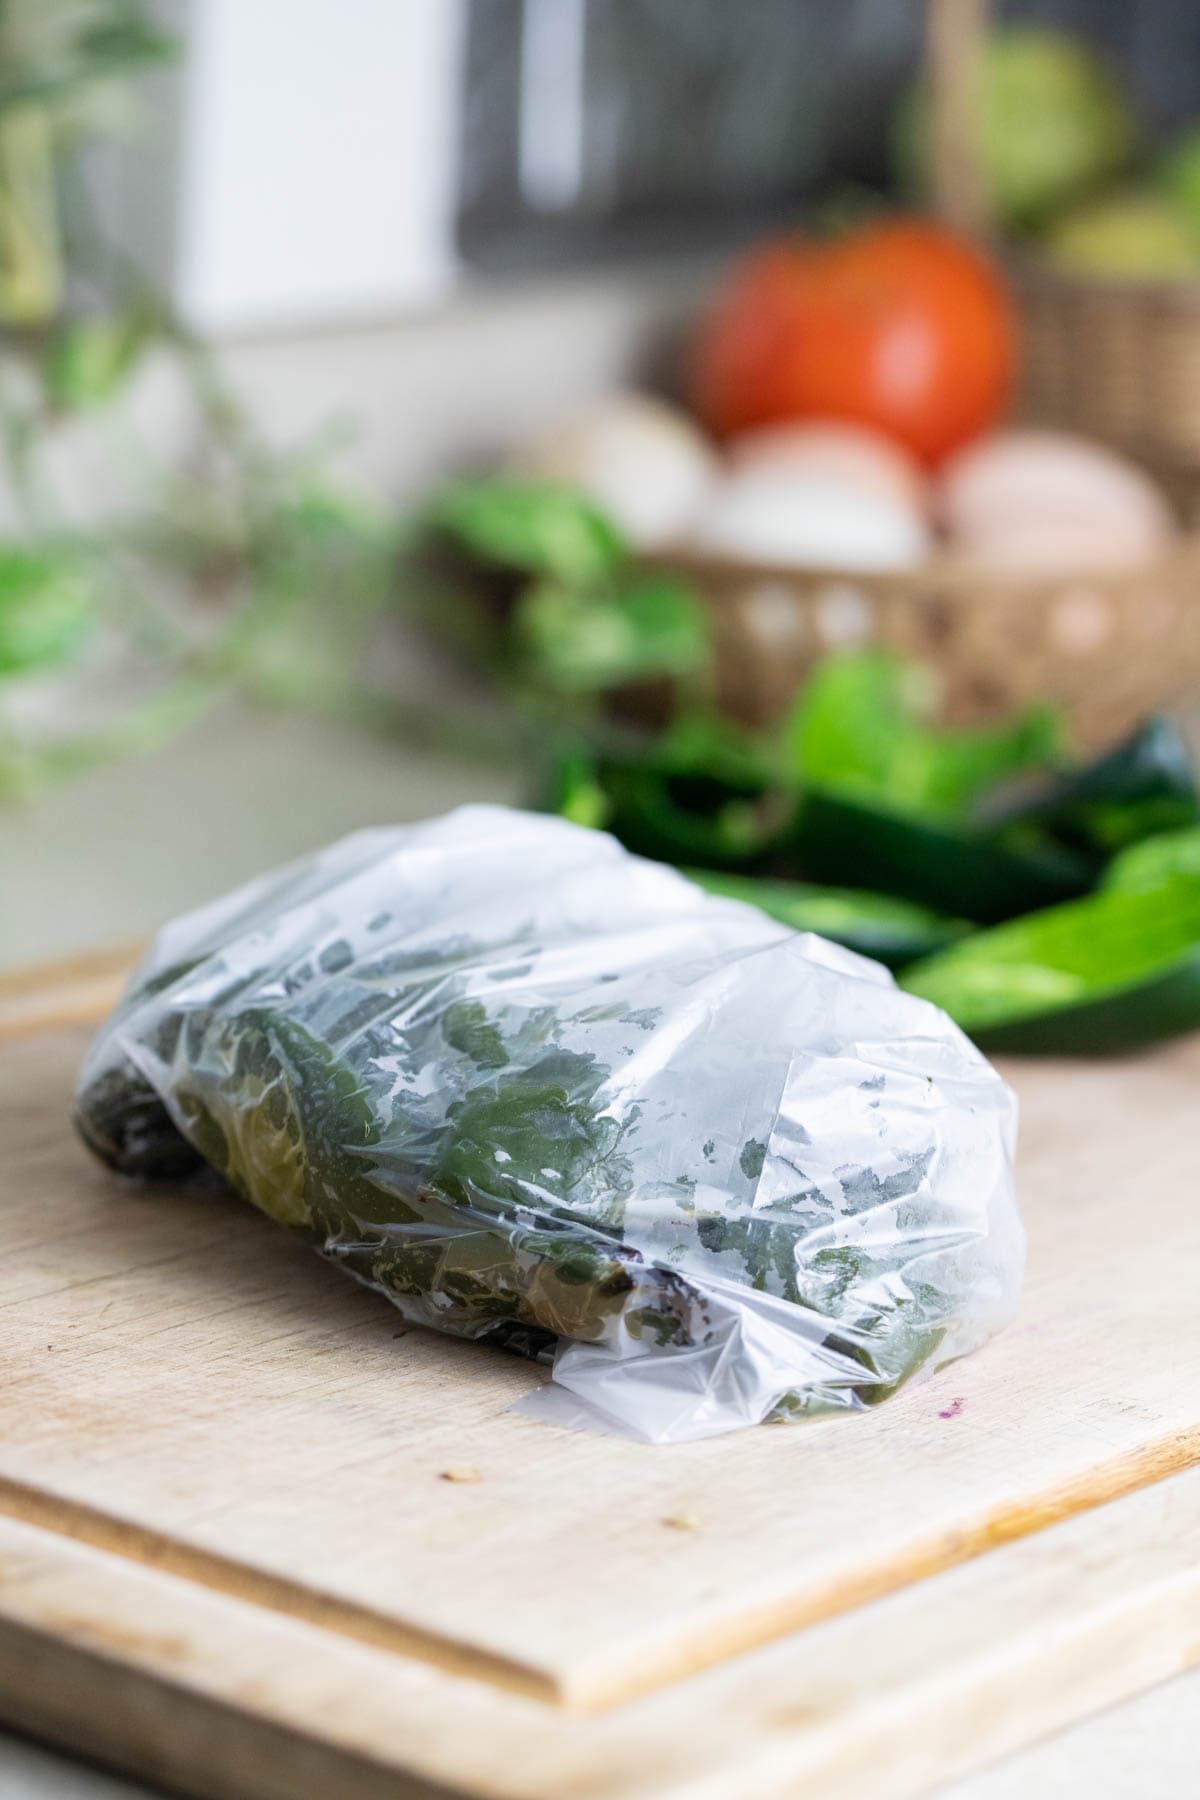 Roasted poblano peppers in a plastic bag.